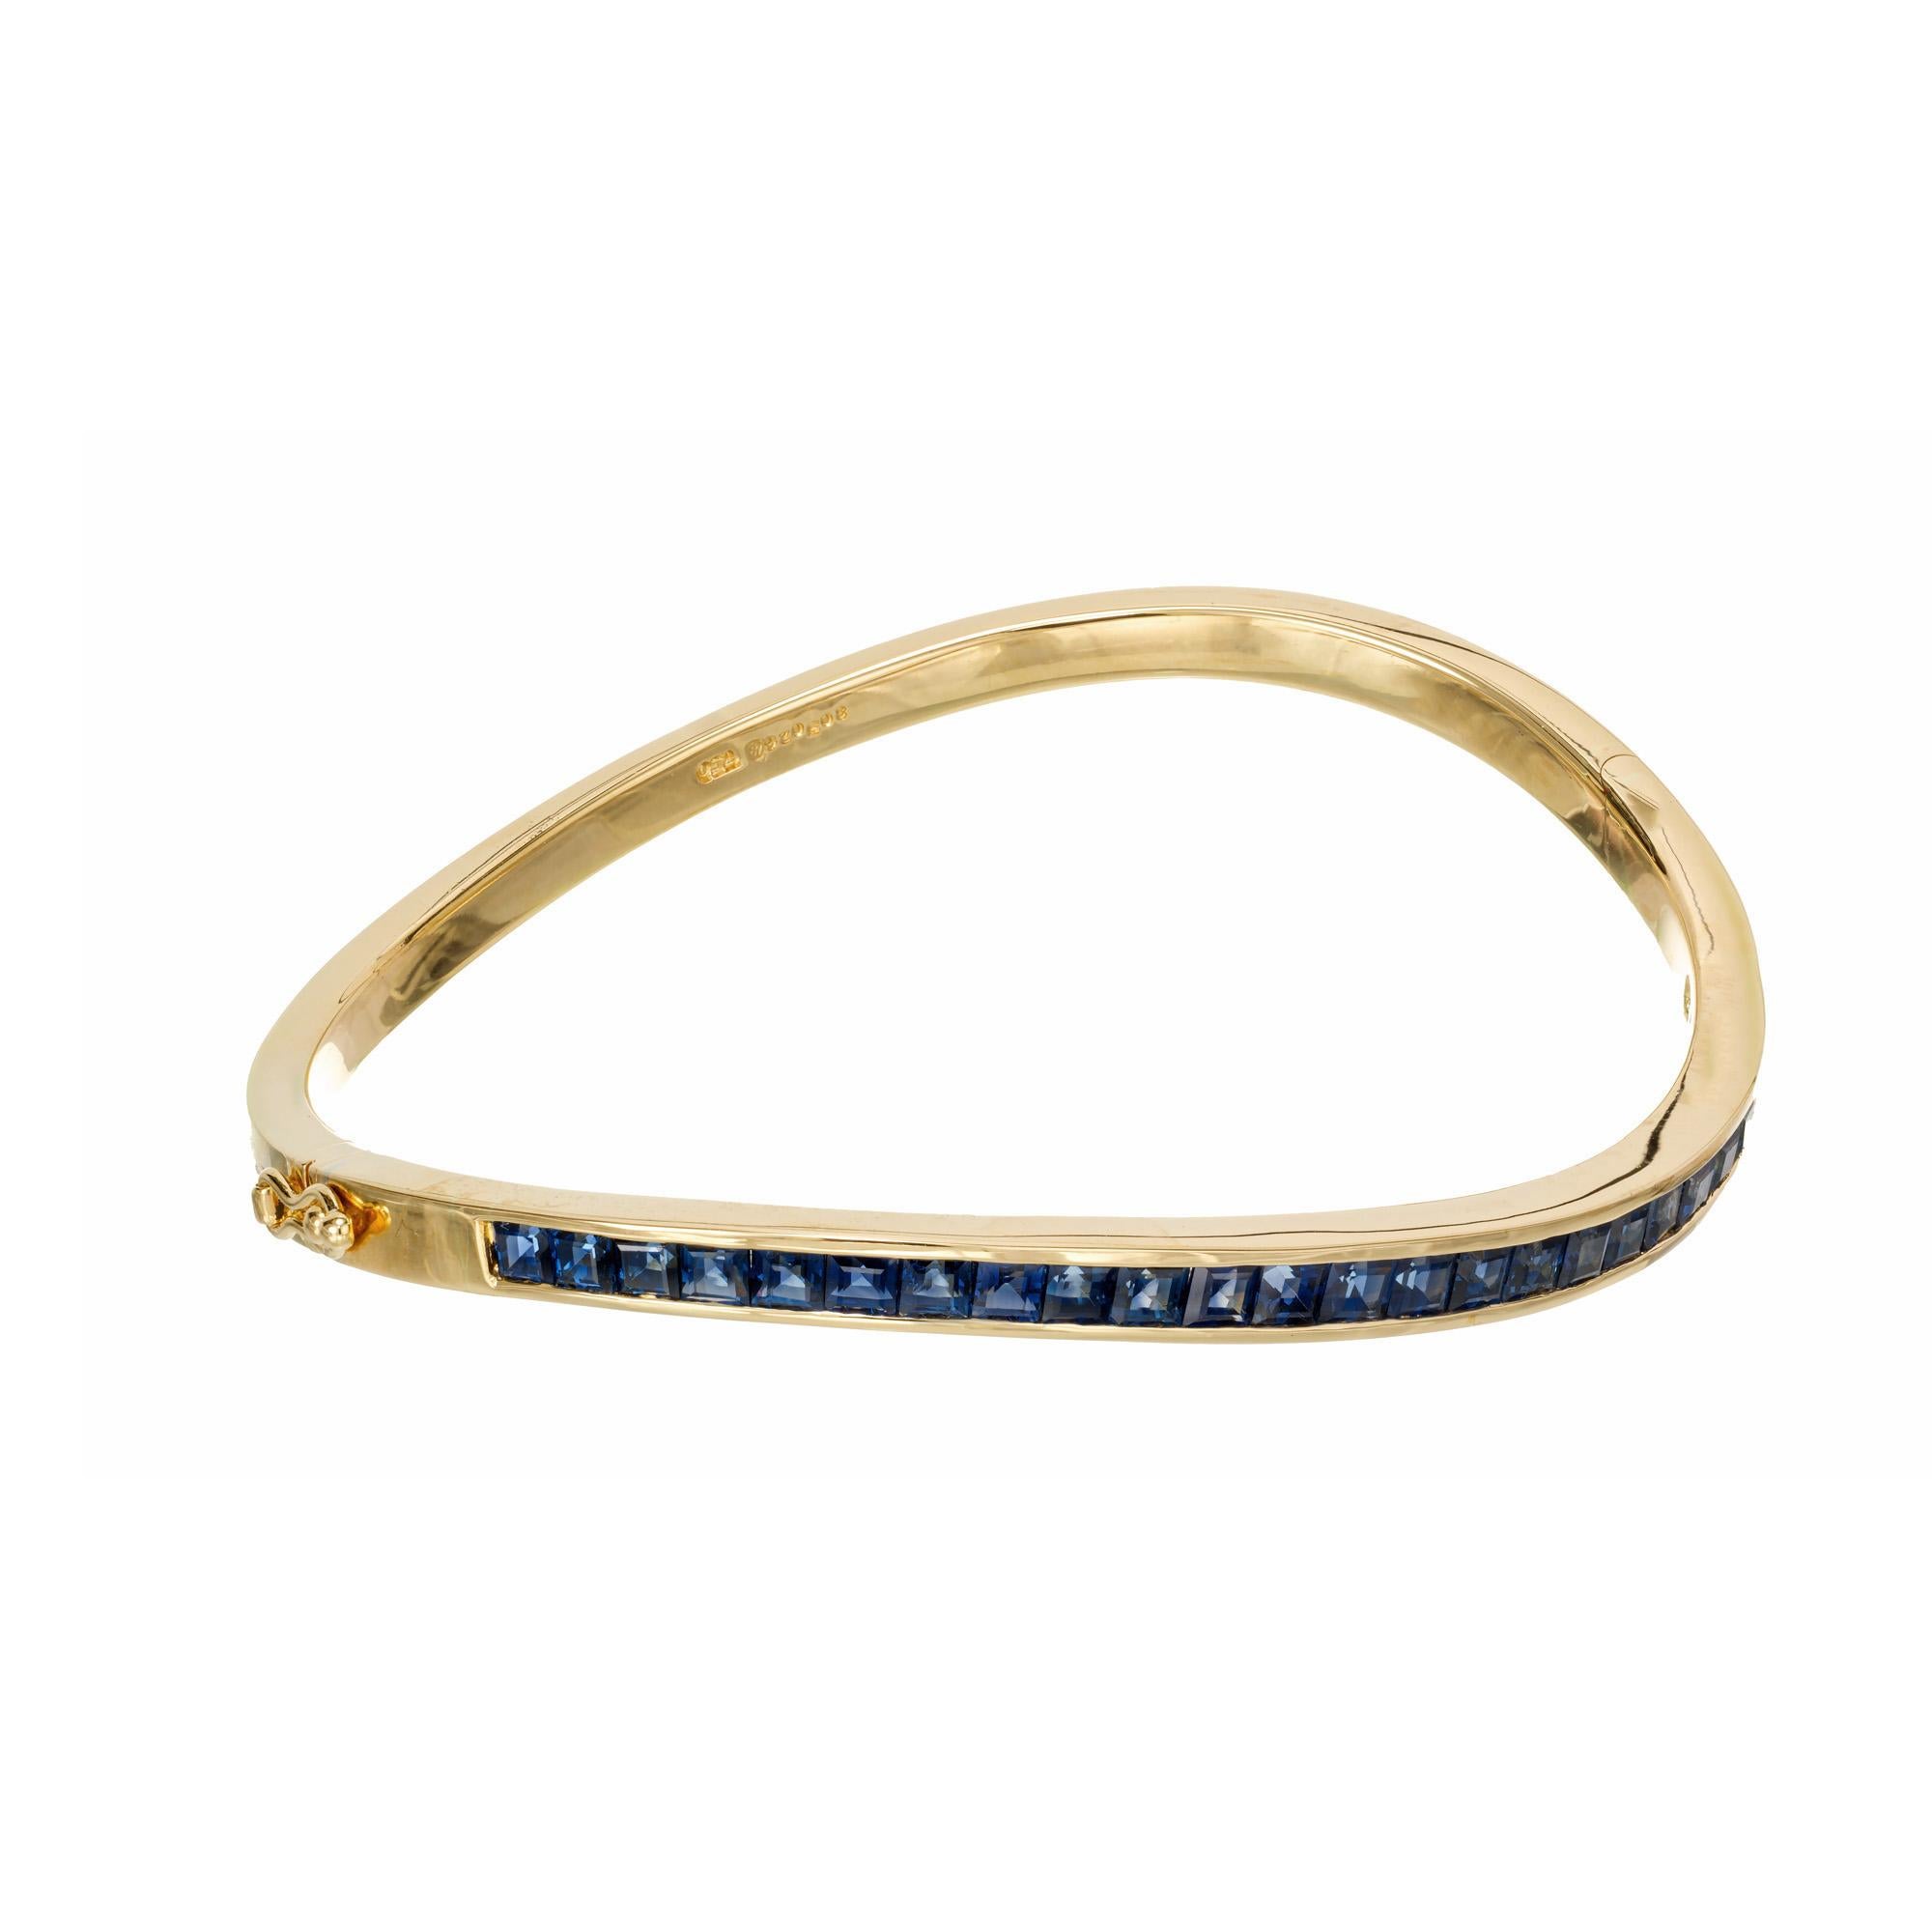 Oscar Heyman Brothers very fine custom french cut swirl chanel set blue sapphire bangle bracelet in 18k gold. GIA certified no heat no enhancements. Fits a 6.5 -7.25 Inch wrist

25 french cut square blue sapphires, MJ approx. 4.50cts GIA